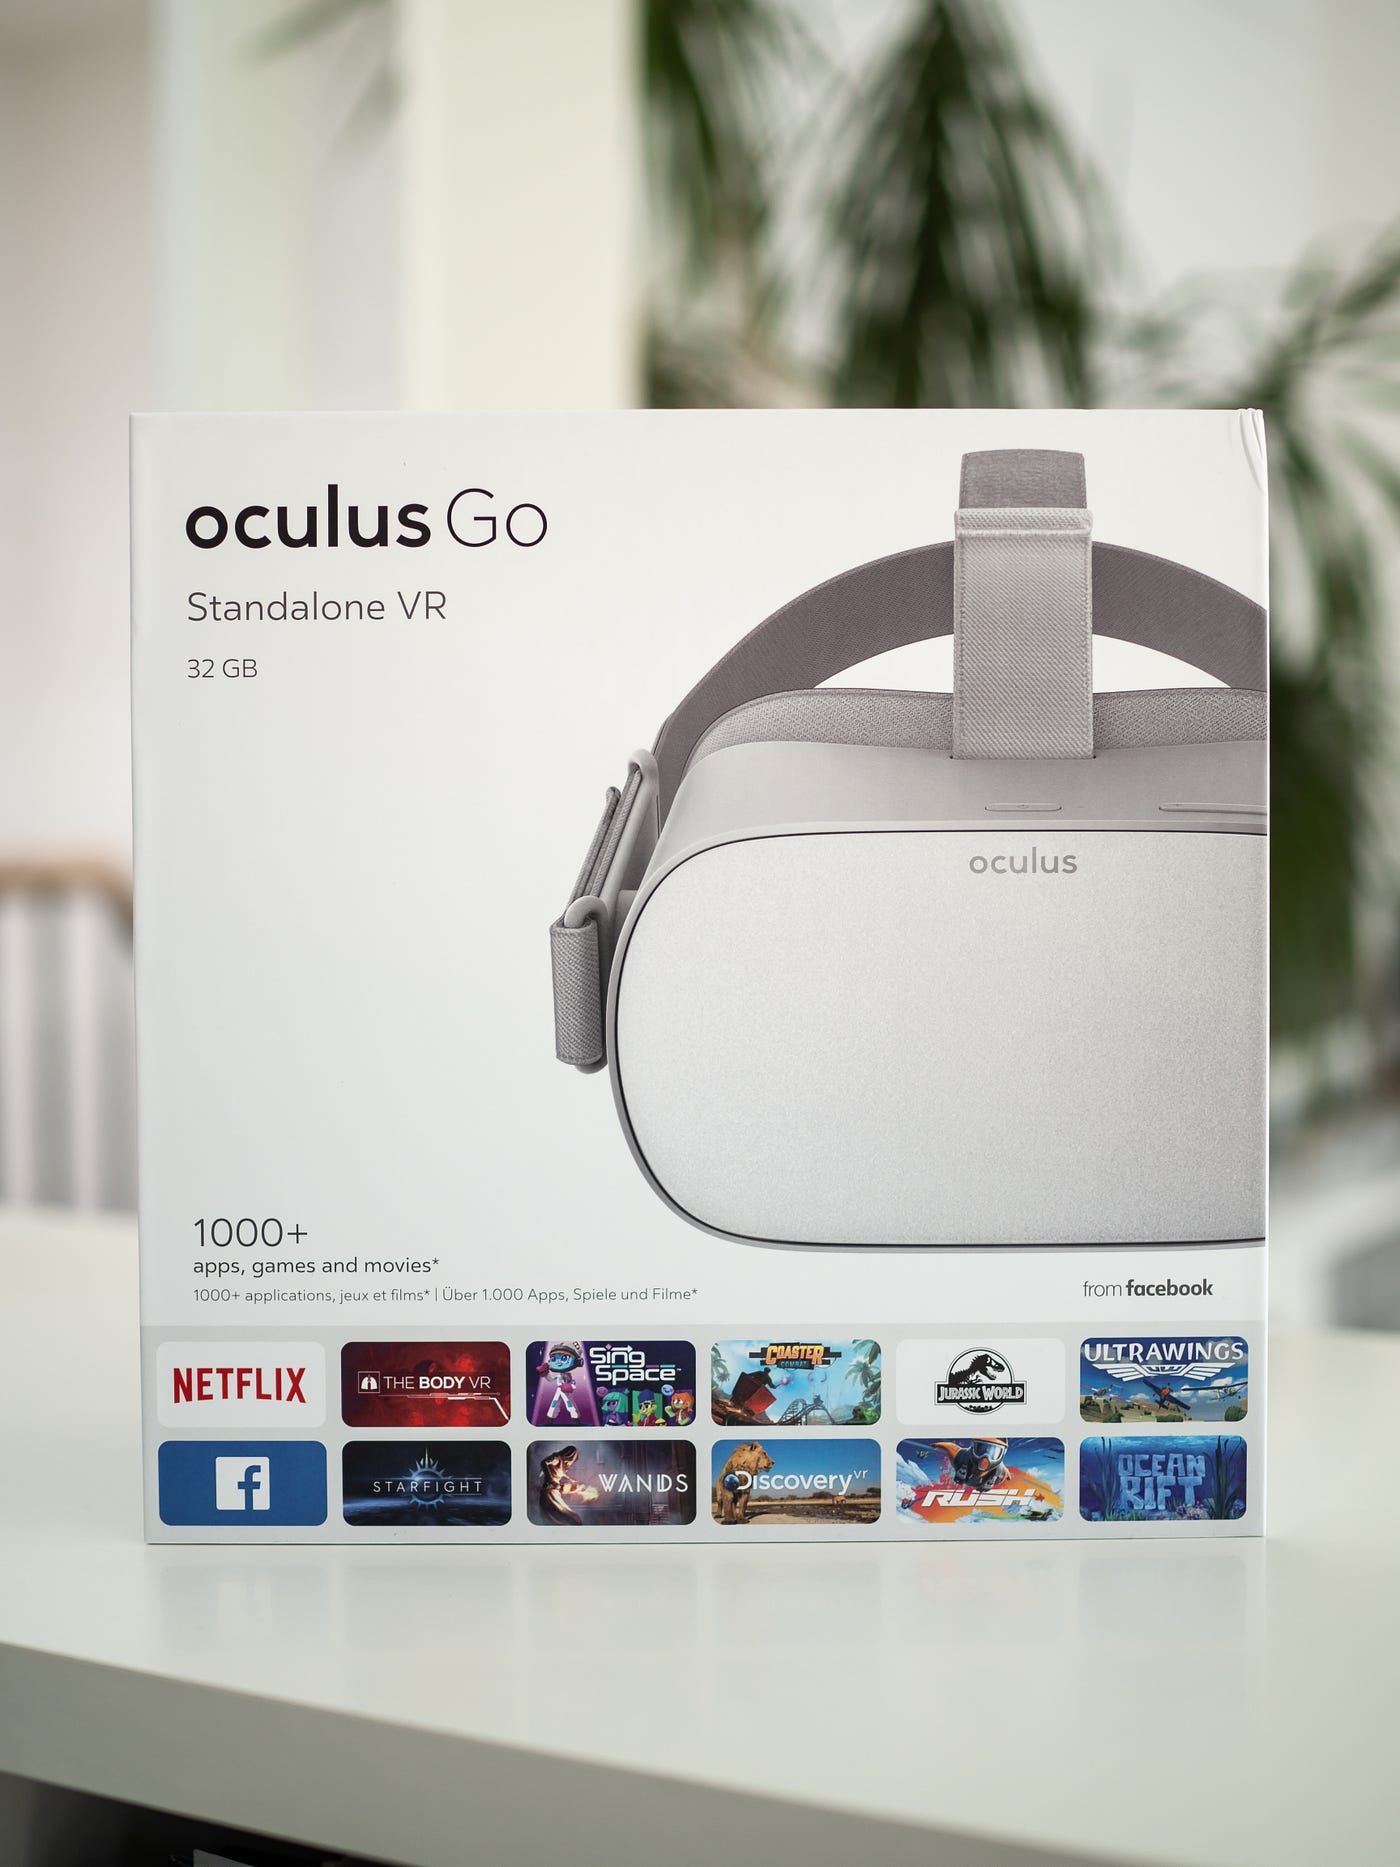 The Top 4 Reasons Why Oculus Go is Making VR for Business More Practical |  by Robert Kendal | AR/VR Journey: Augmented & Virtual Reality Magazine